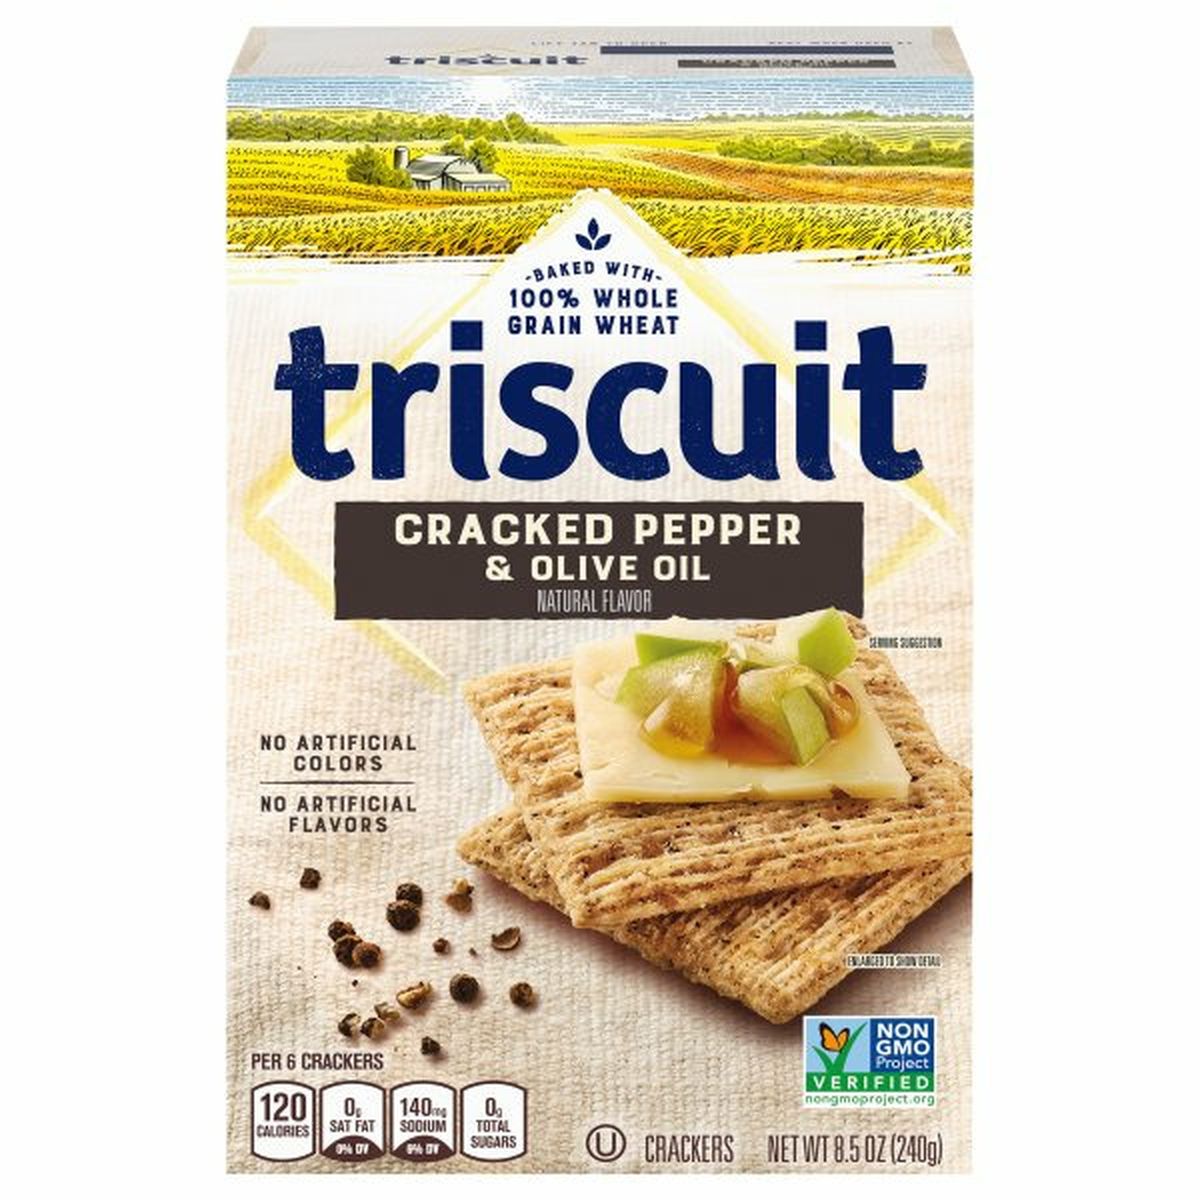 Calories in Triscuit Crackers, Cracked Pepper & Olive Oil